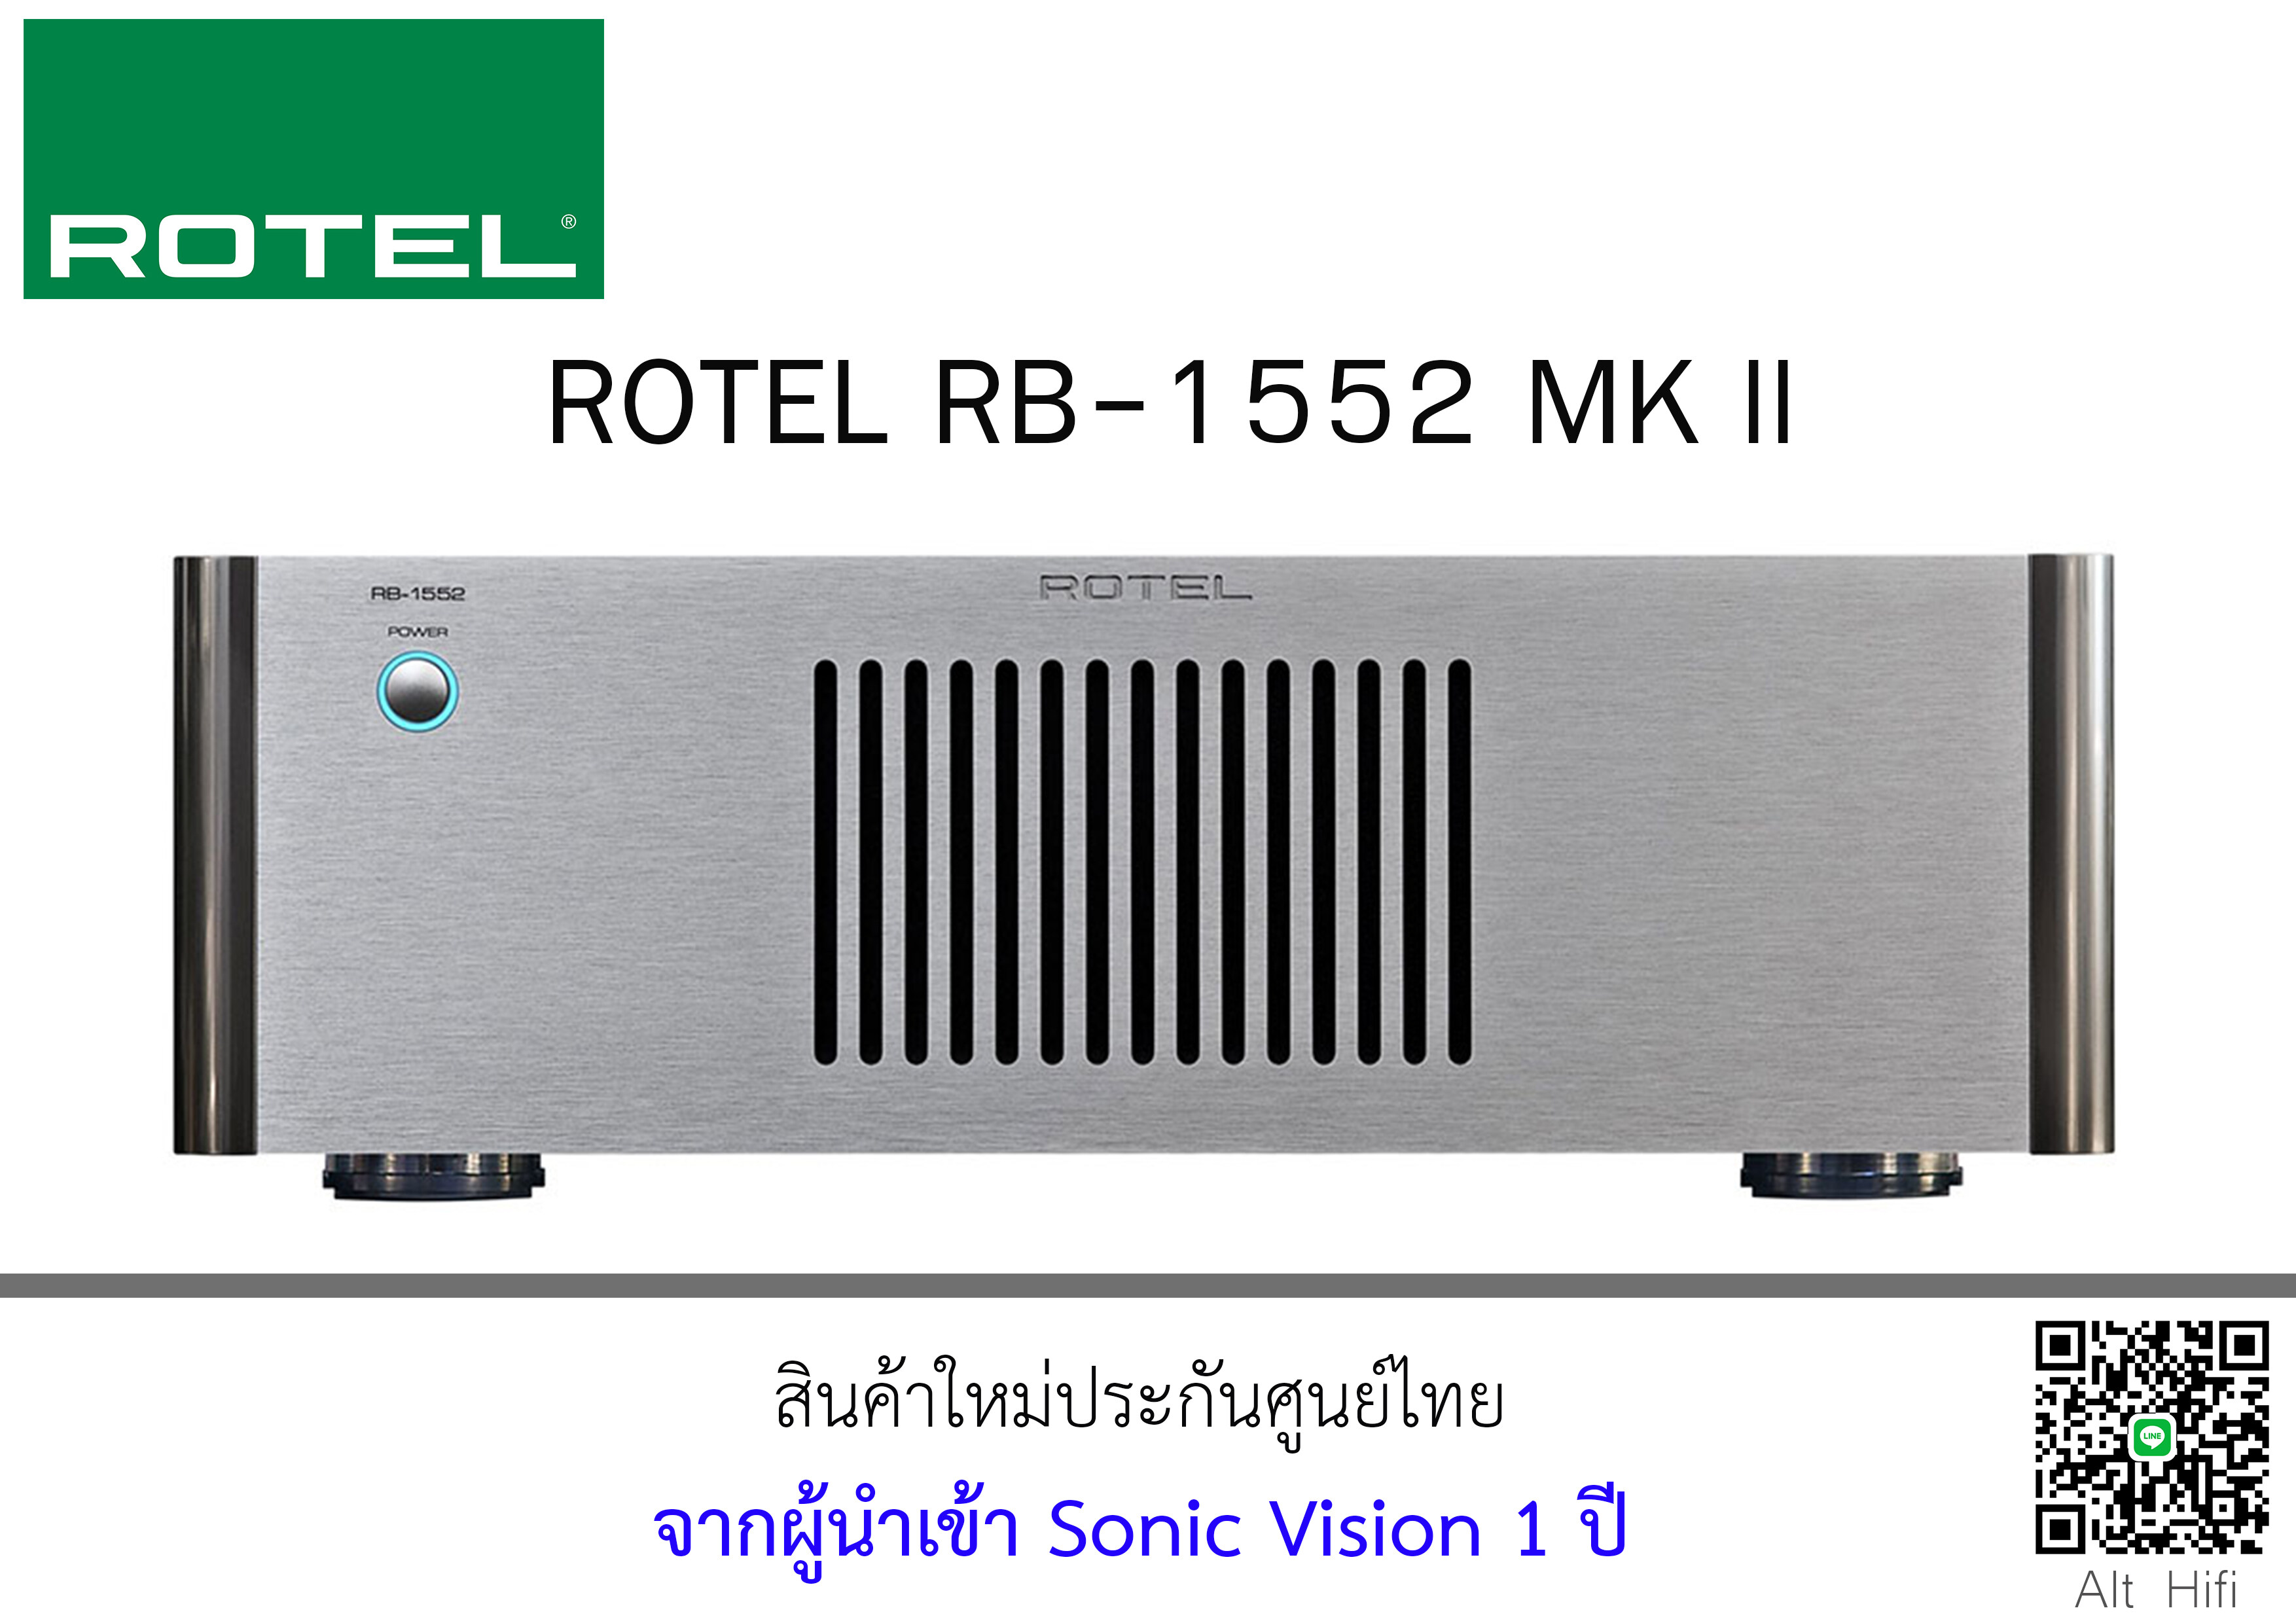 ROTEL  RB-1552 MK II  Stereo Power Amp